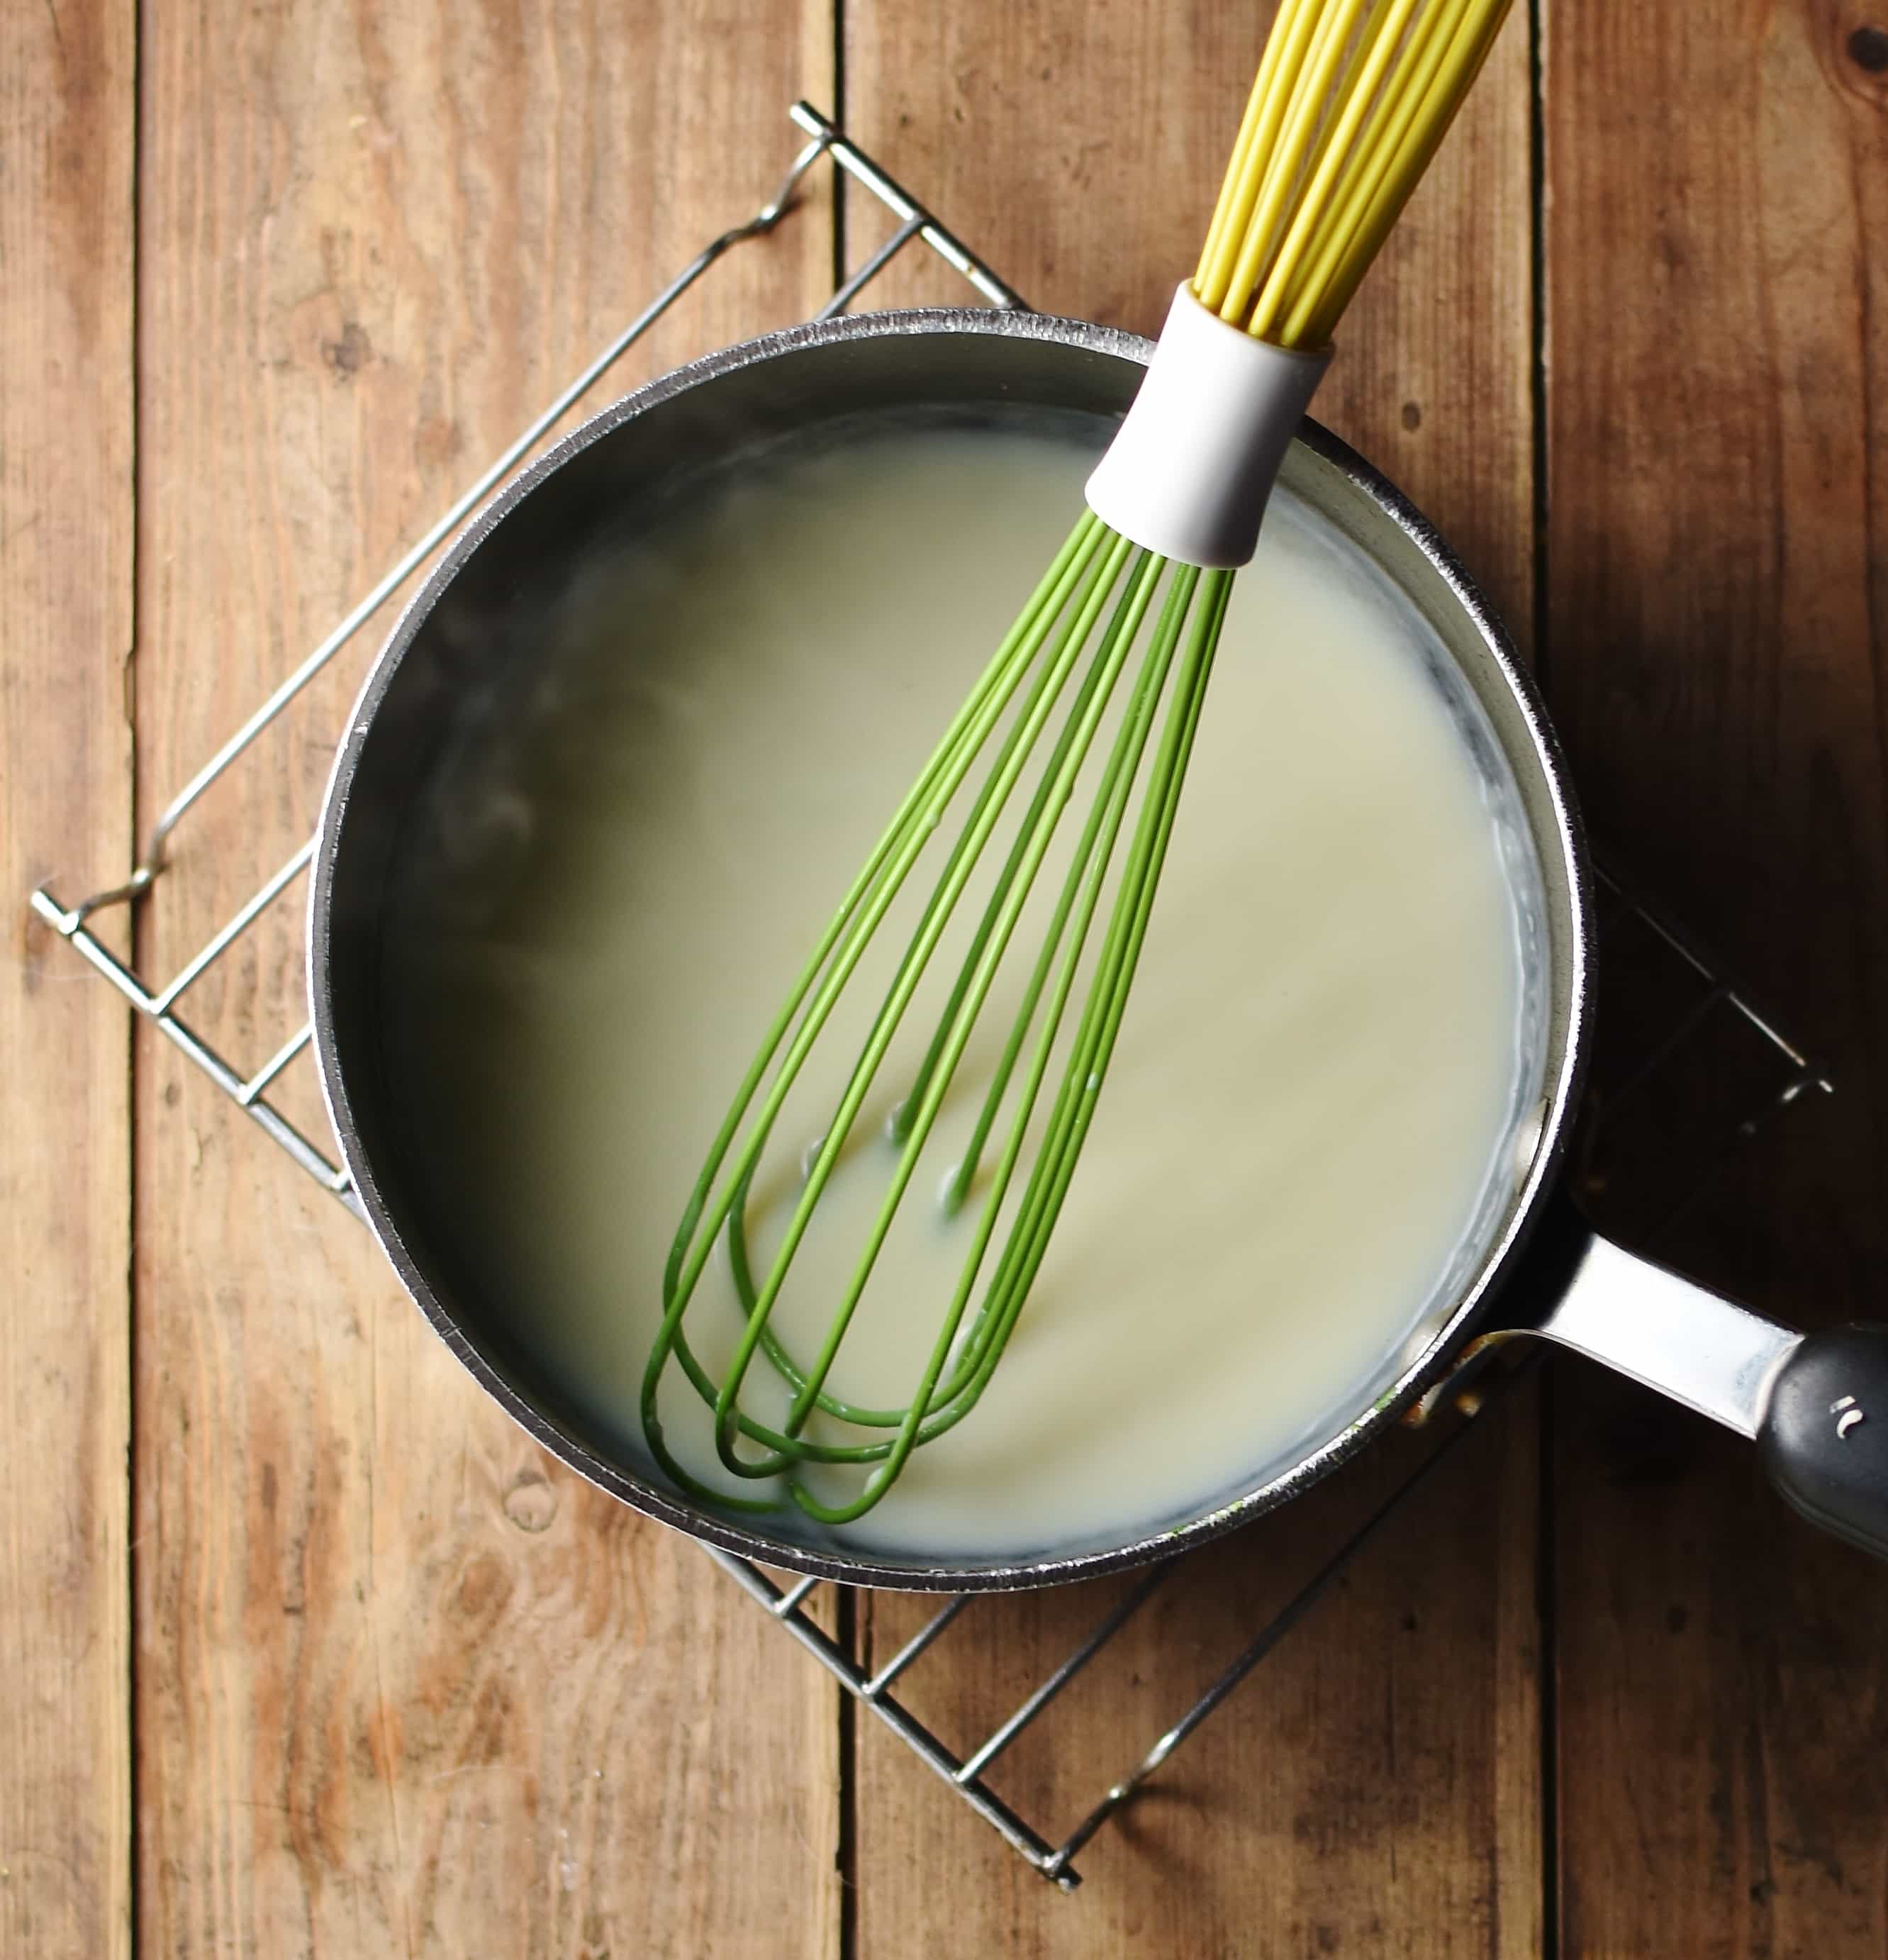 White sauce in large pot with green whisk on top of cooling rack.